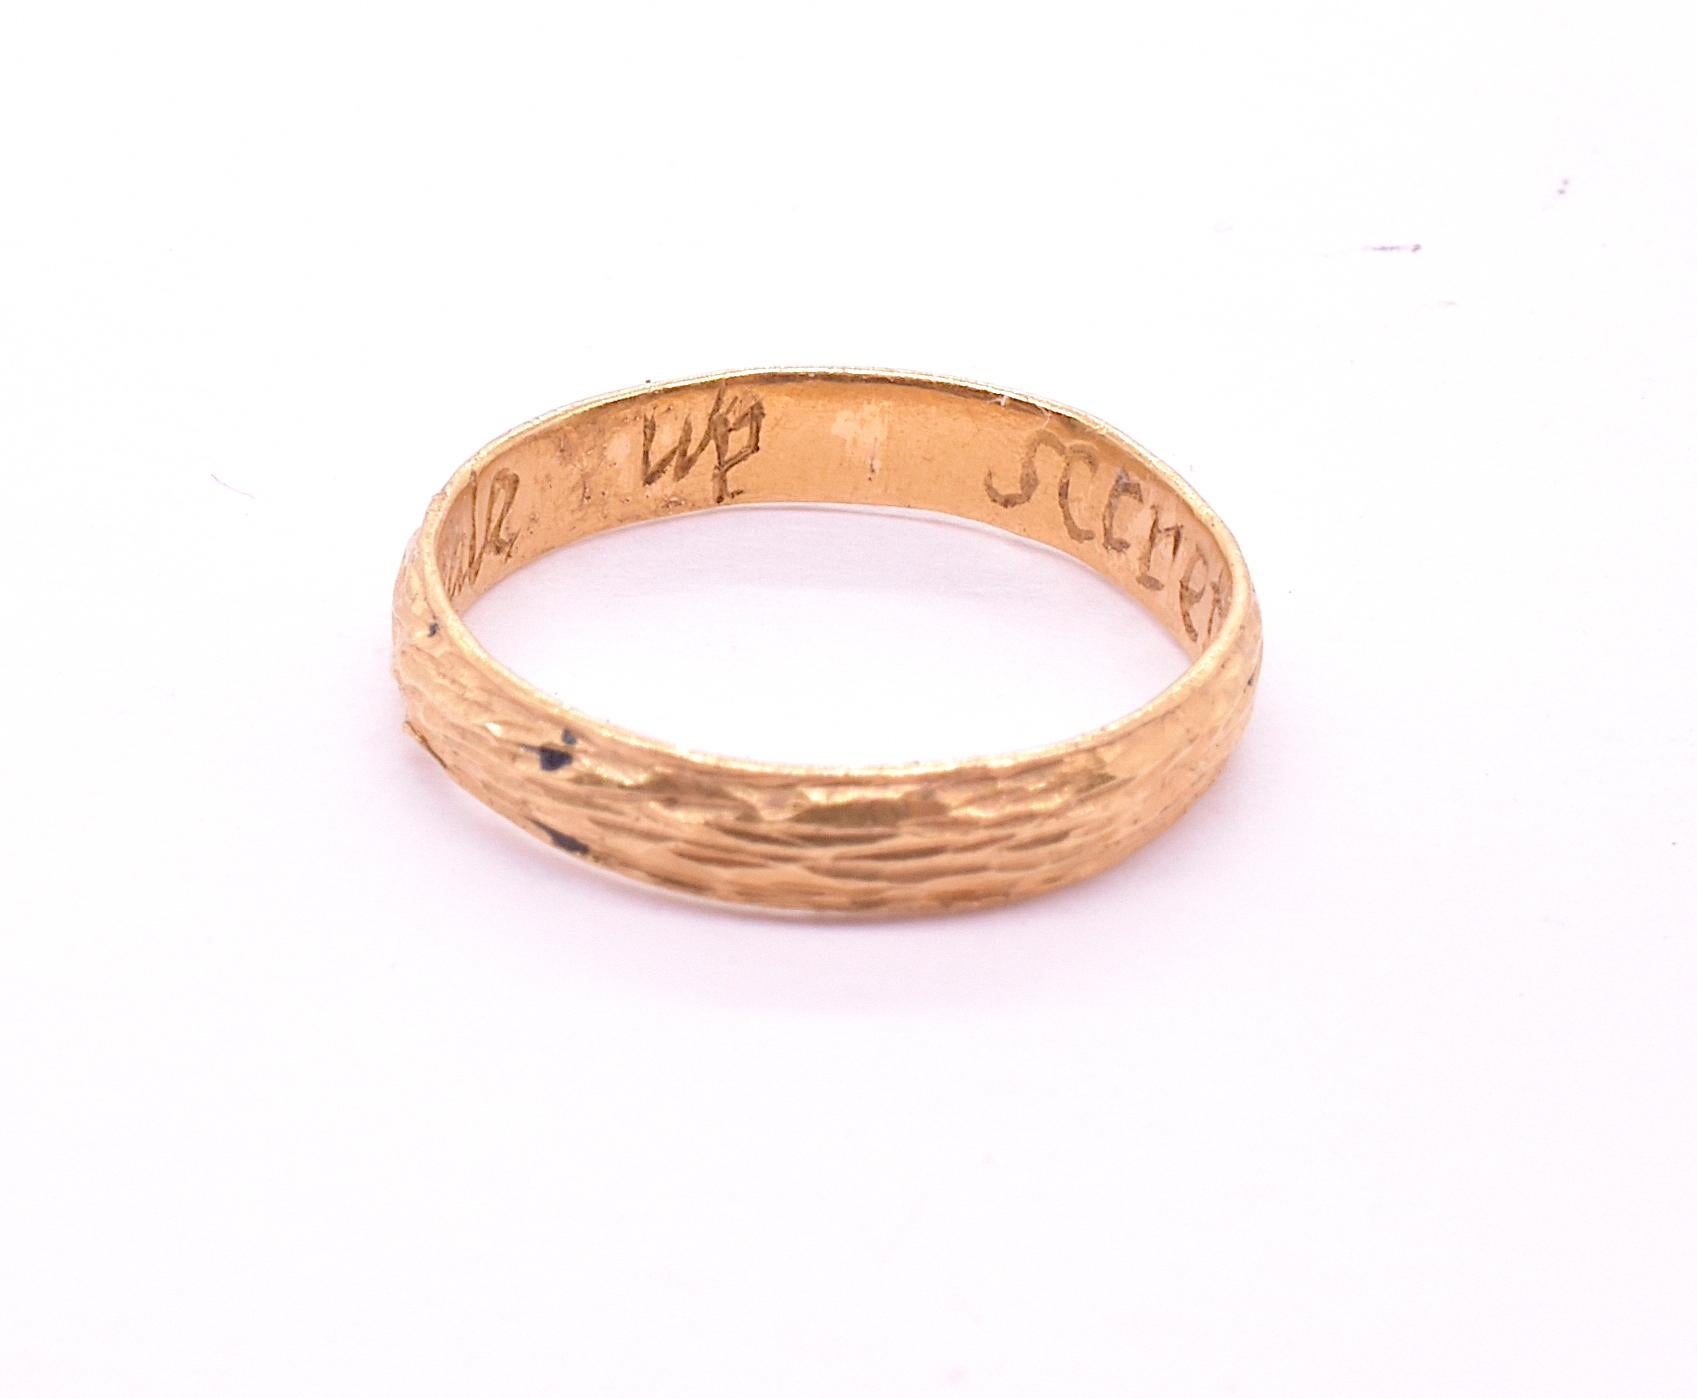 Our poesy ring (spelled posy, posie, or posey) has the deep color of a 22carat ring along with a textured pattern and an interesting inscription 